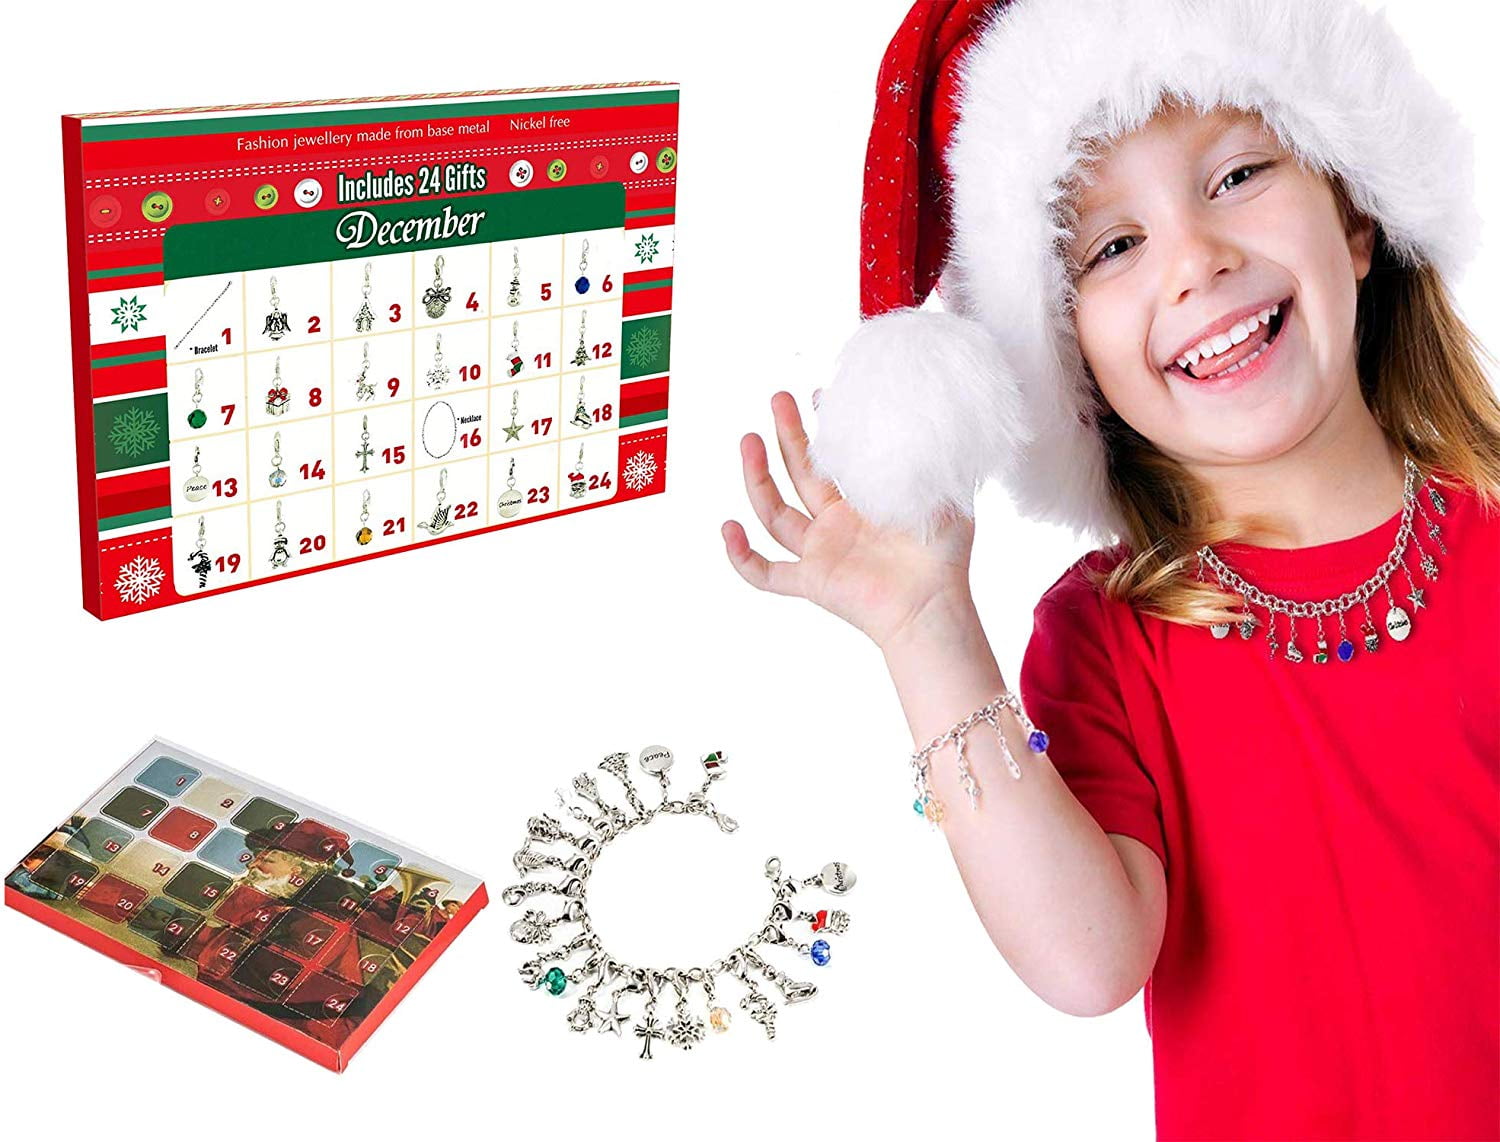 DIY Countdown 2020 Calendars ONNPNN Christmas Advent Calendar Fashion Jewelry Charms Gold Bracelet Necklace Gift Box Xmas Ornament Decoration for Kids Girls Daughter Teens Day Surprise Beads